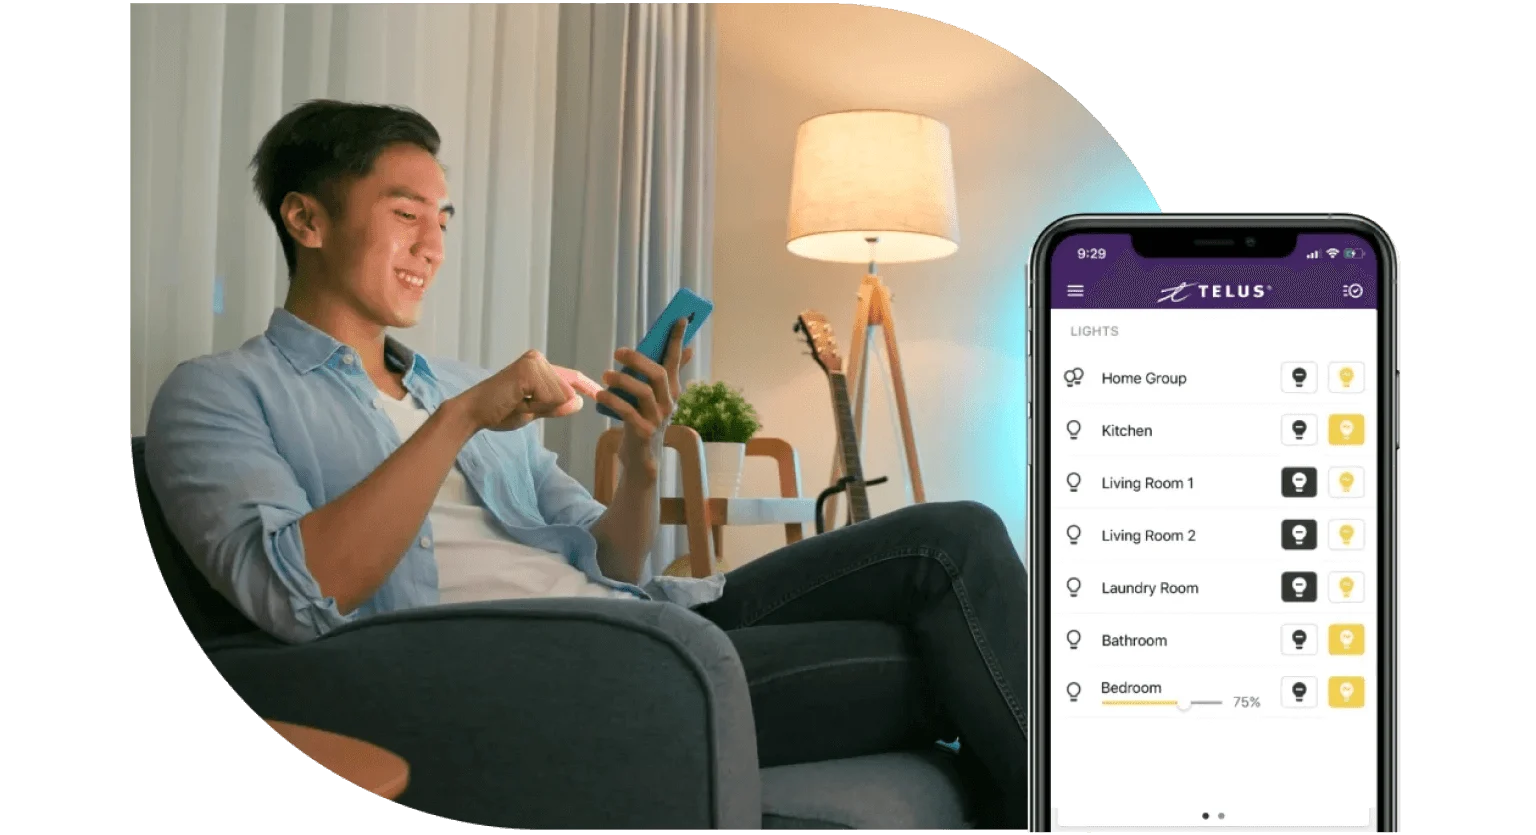 An image showing a man using his smartphone alongside an image of a smartphone displaying the TELUS SmartHome app control panel.